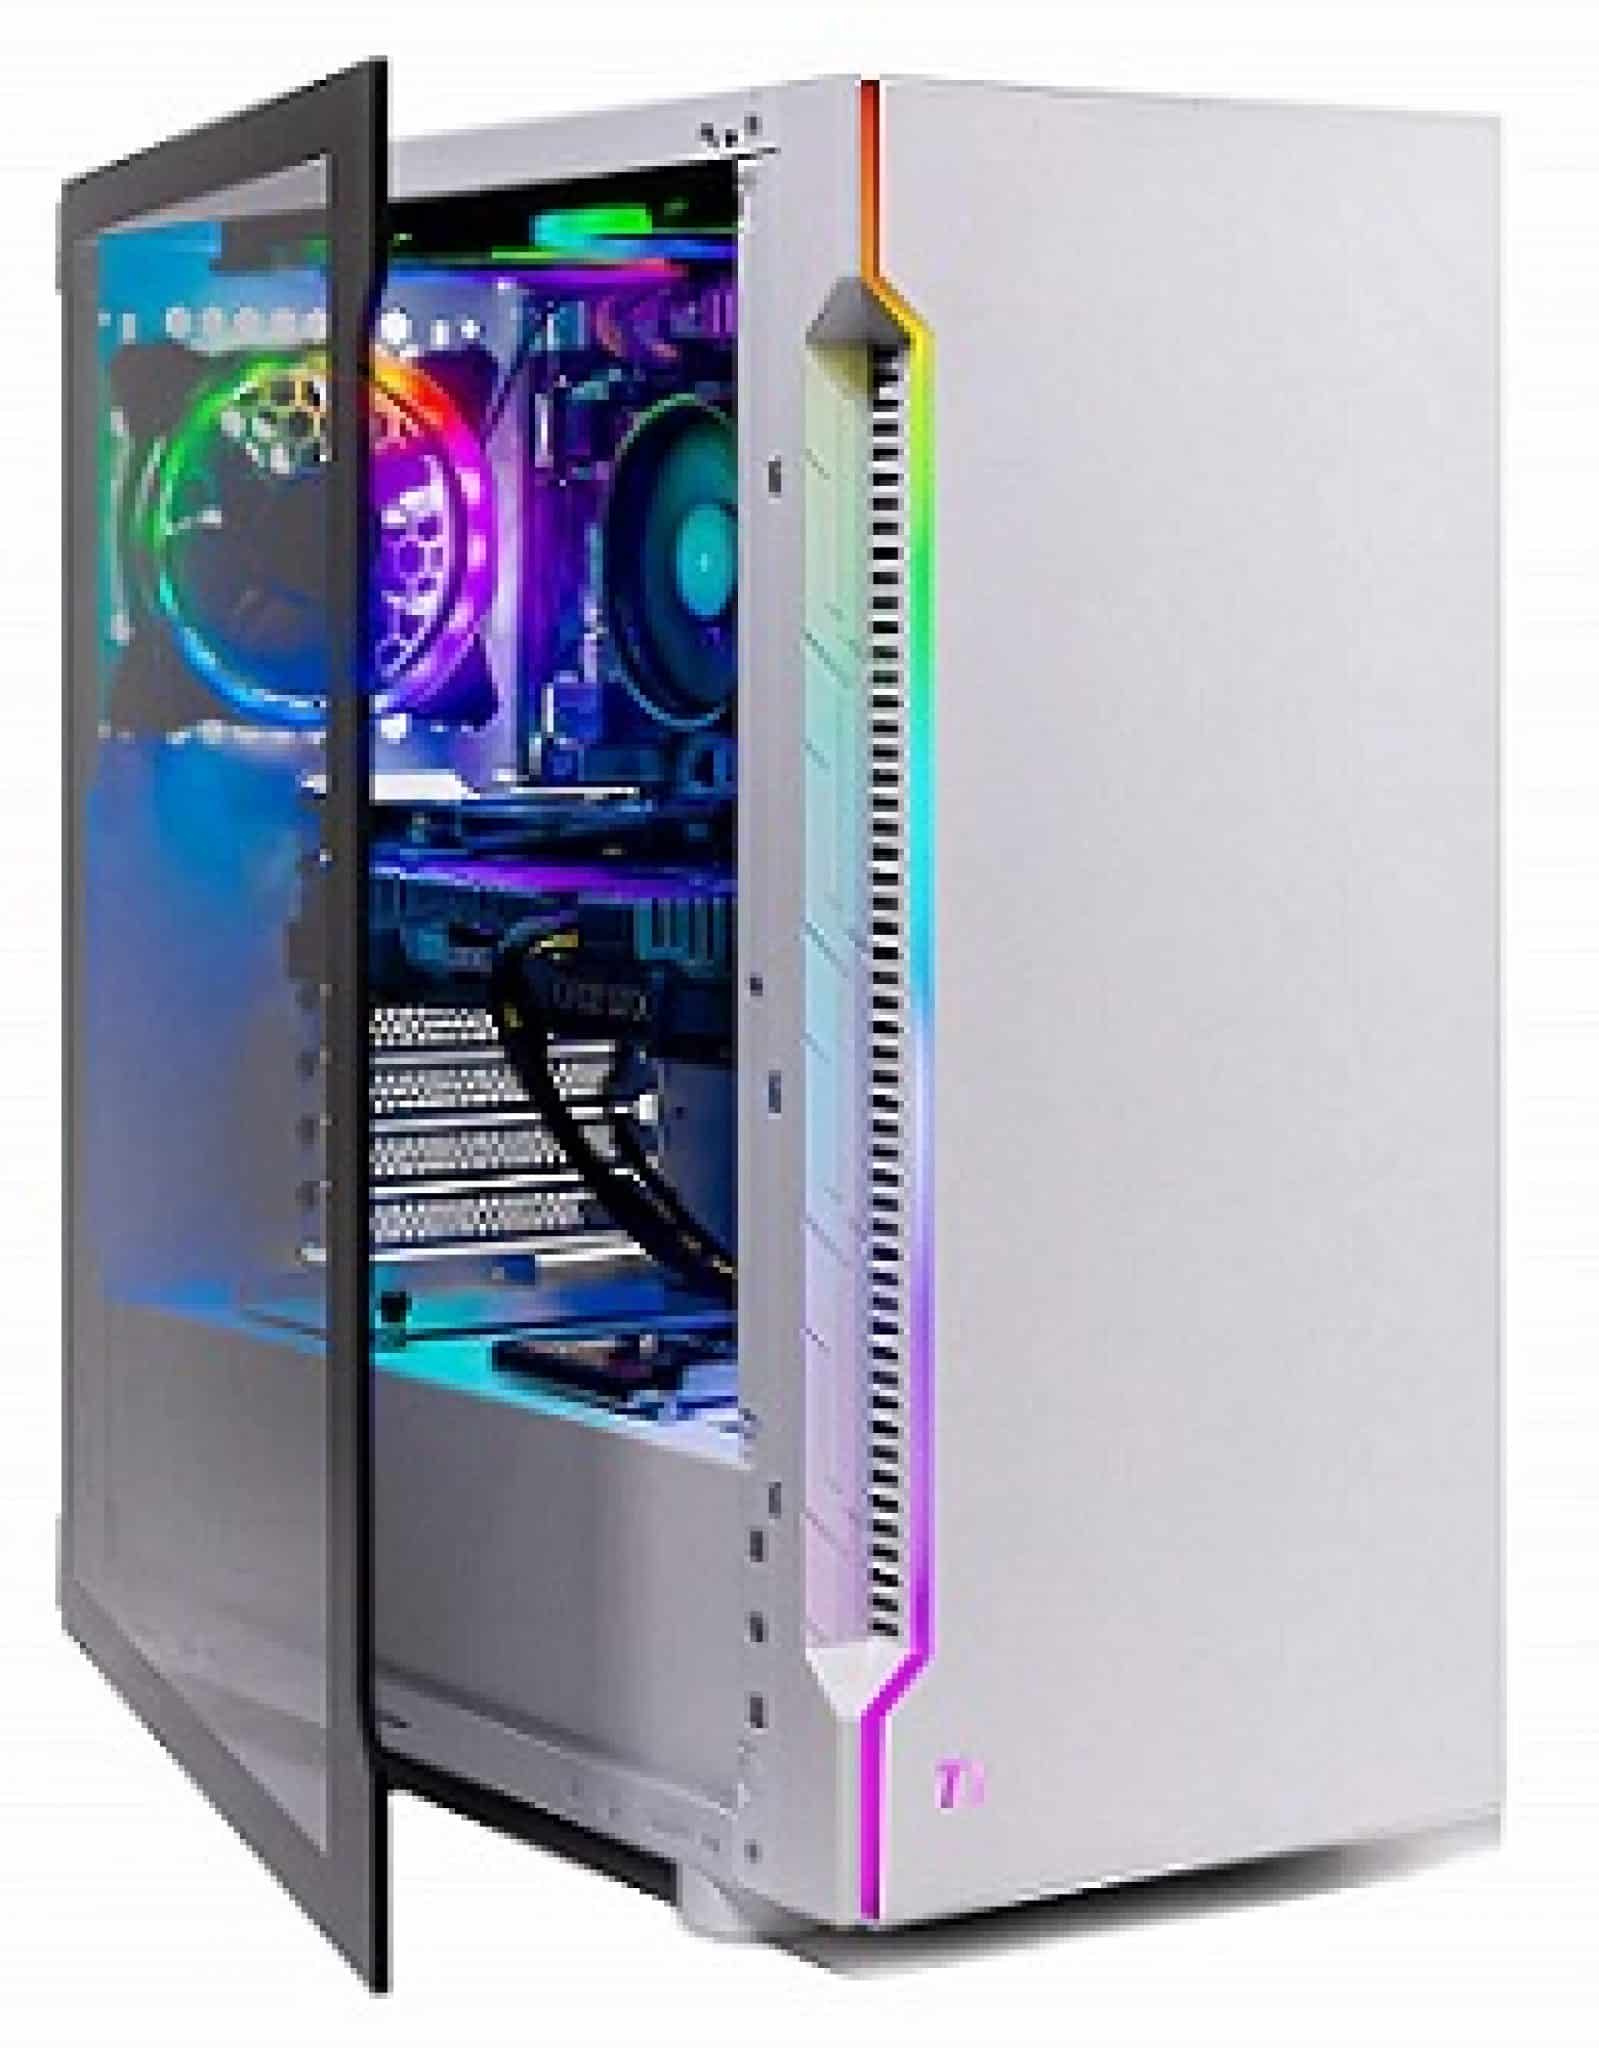 Wooden Best Prebuilt Gaming Pc Under 70000 for Small Bedroom